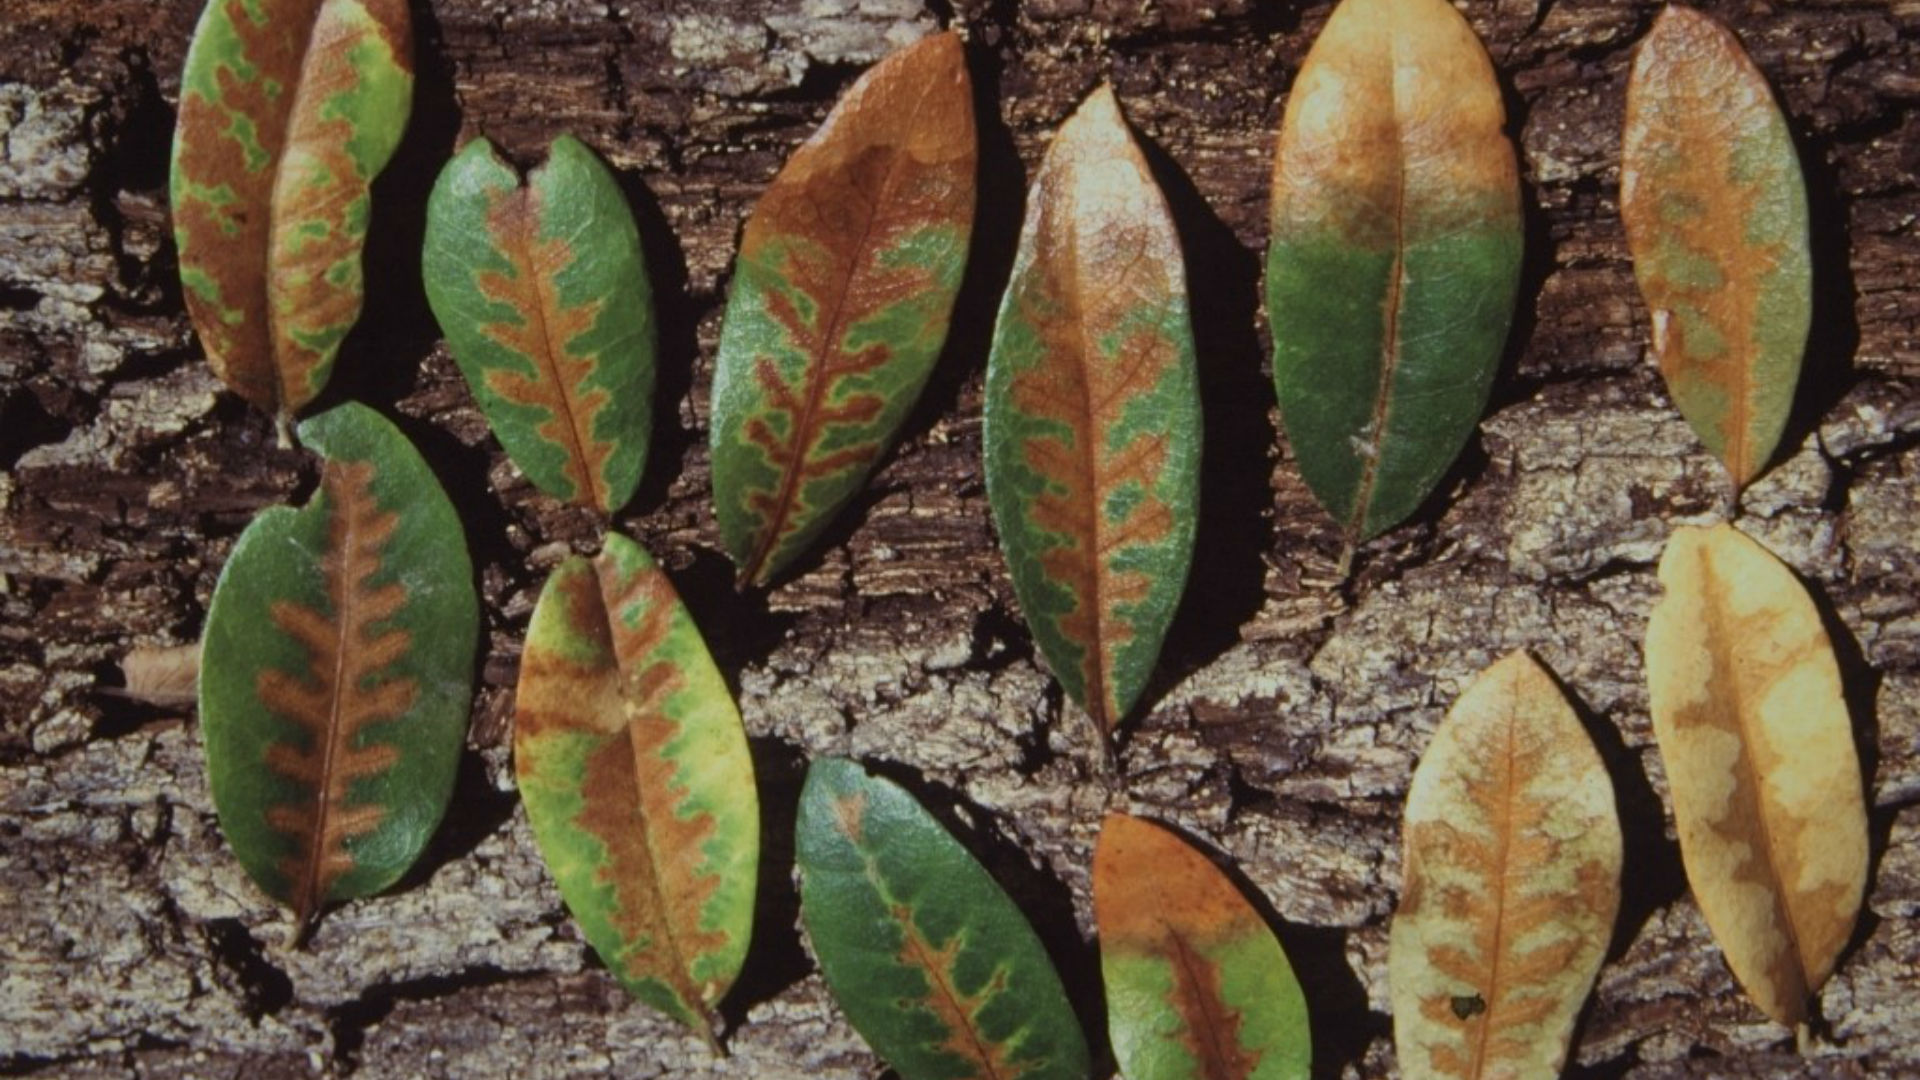 Leaves infected with oak wilt